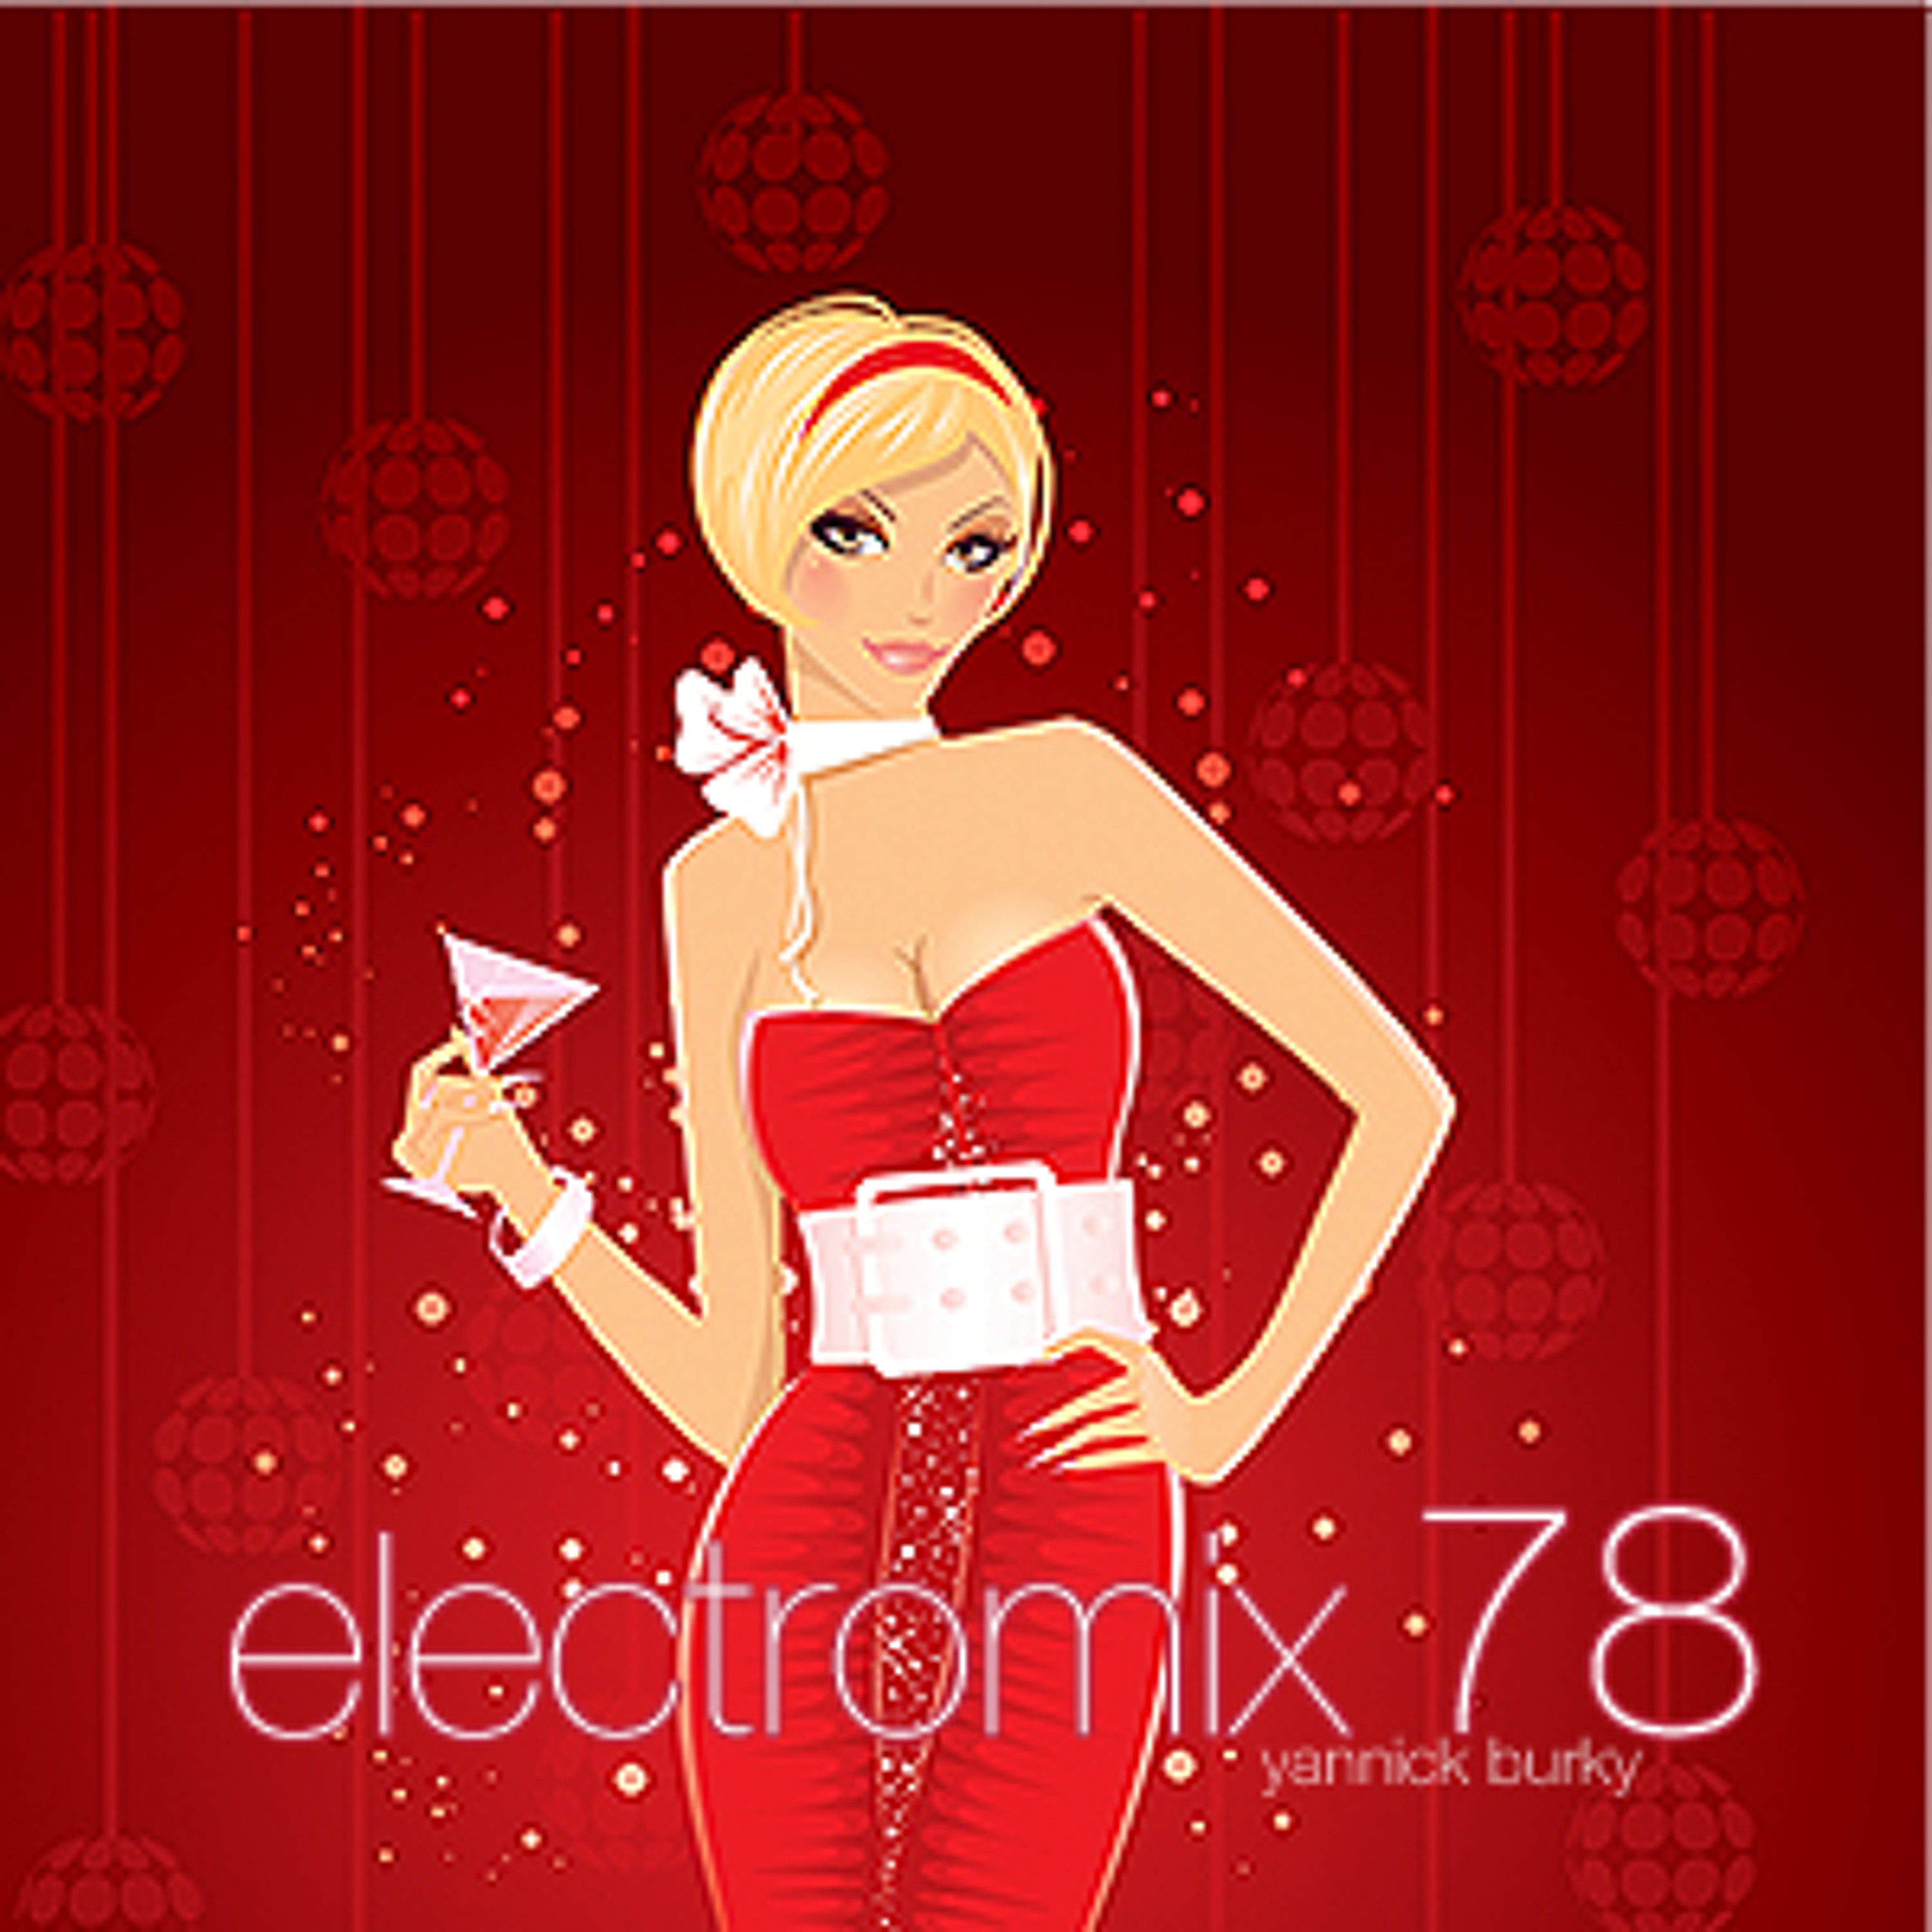 electromix 78 • House Music